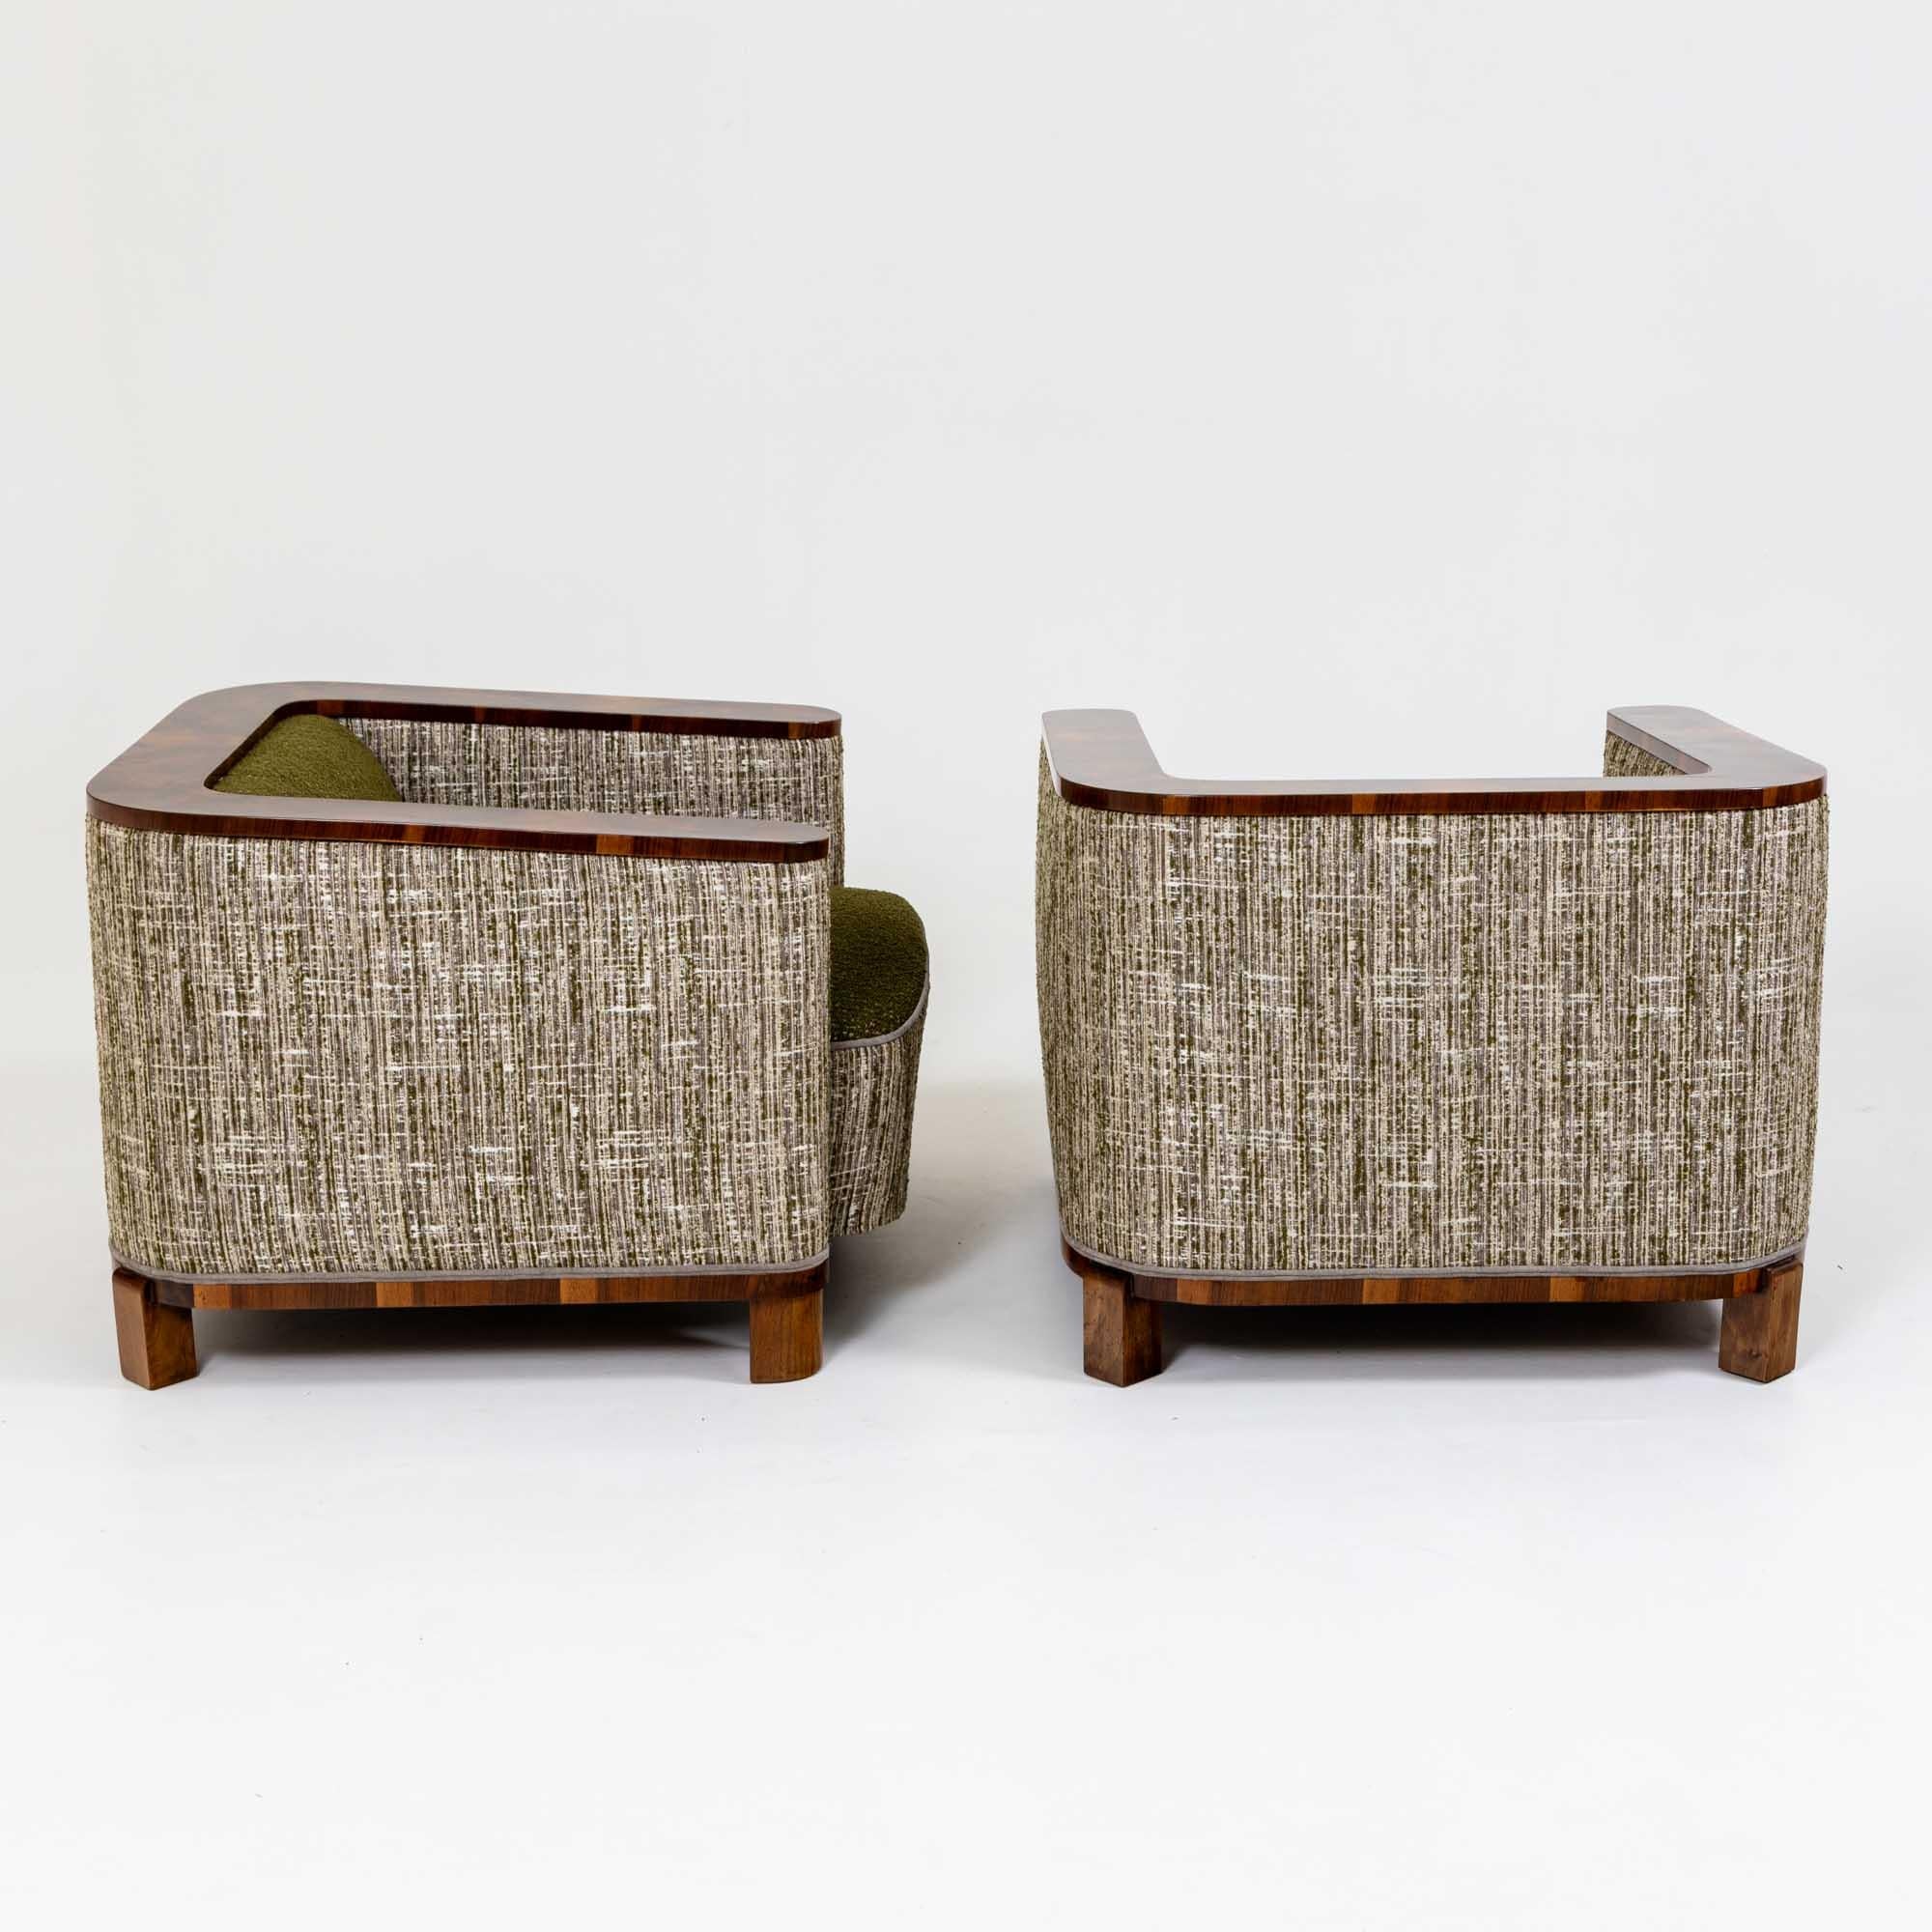 A pair of Art Deco club chairs with foot stools. 
Chairs & foot stools detailed in walnut veneer.